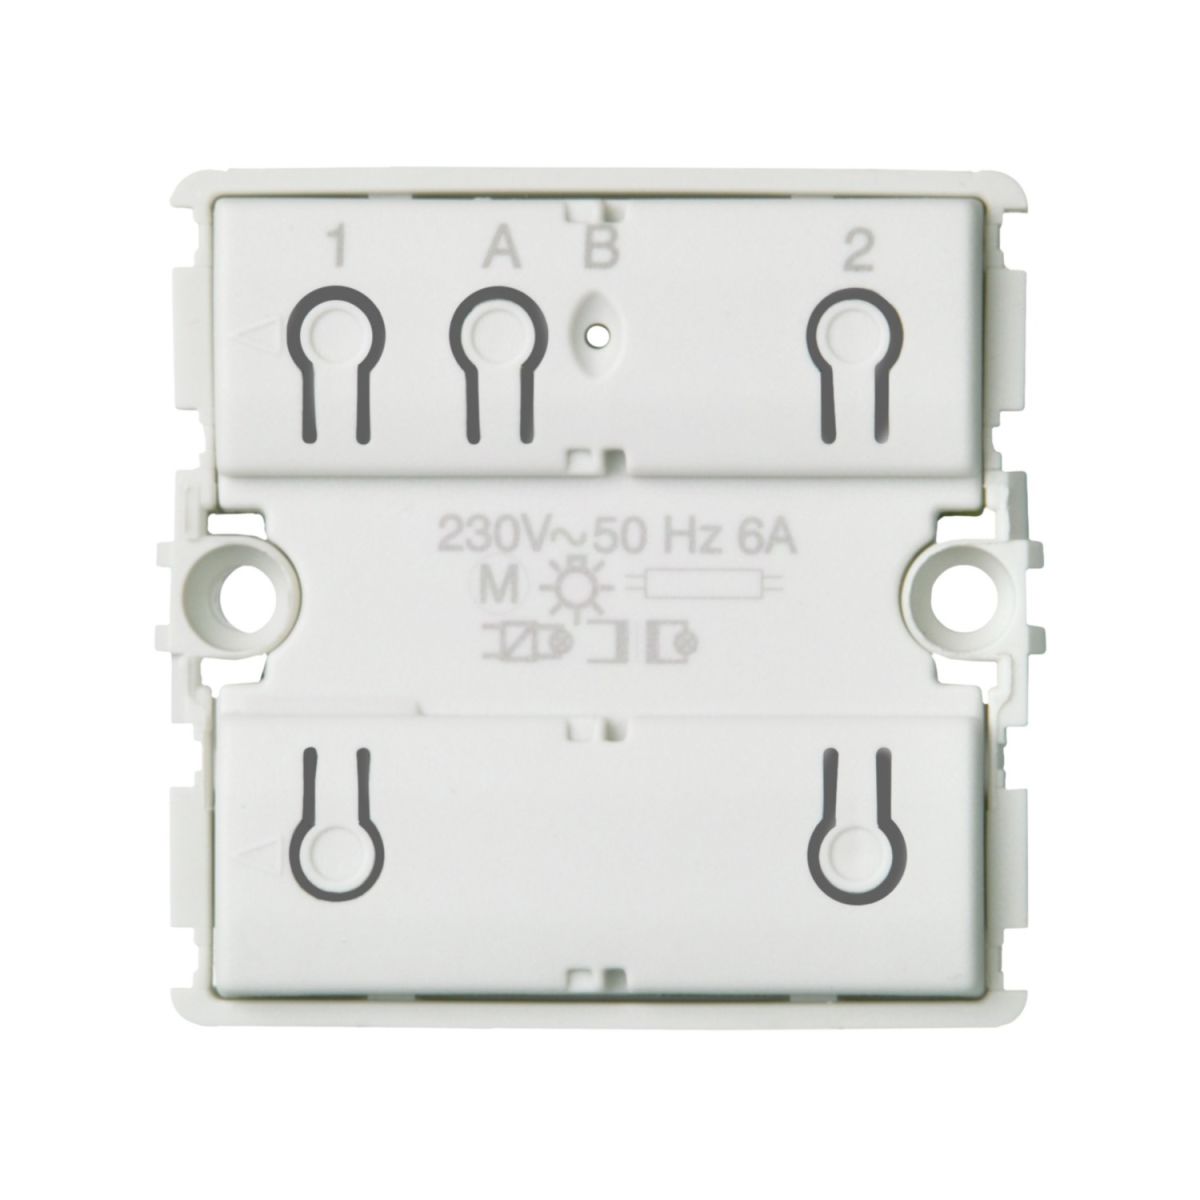 UP-Dimmer Universal 776300